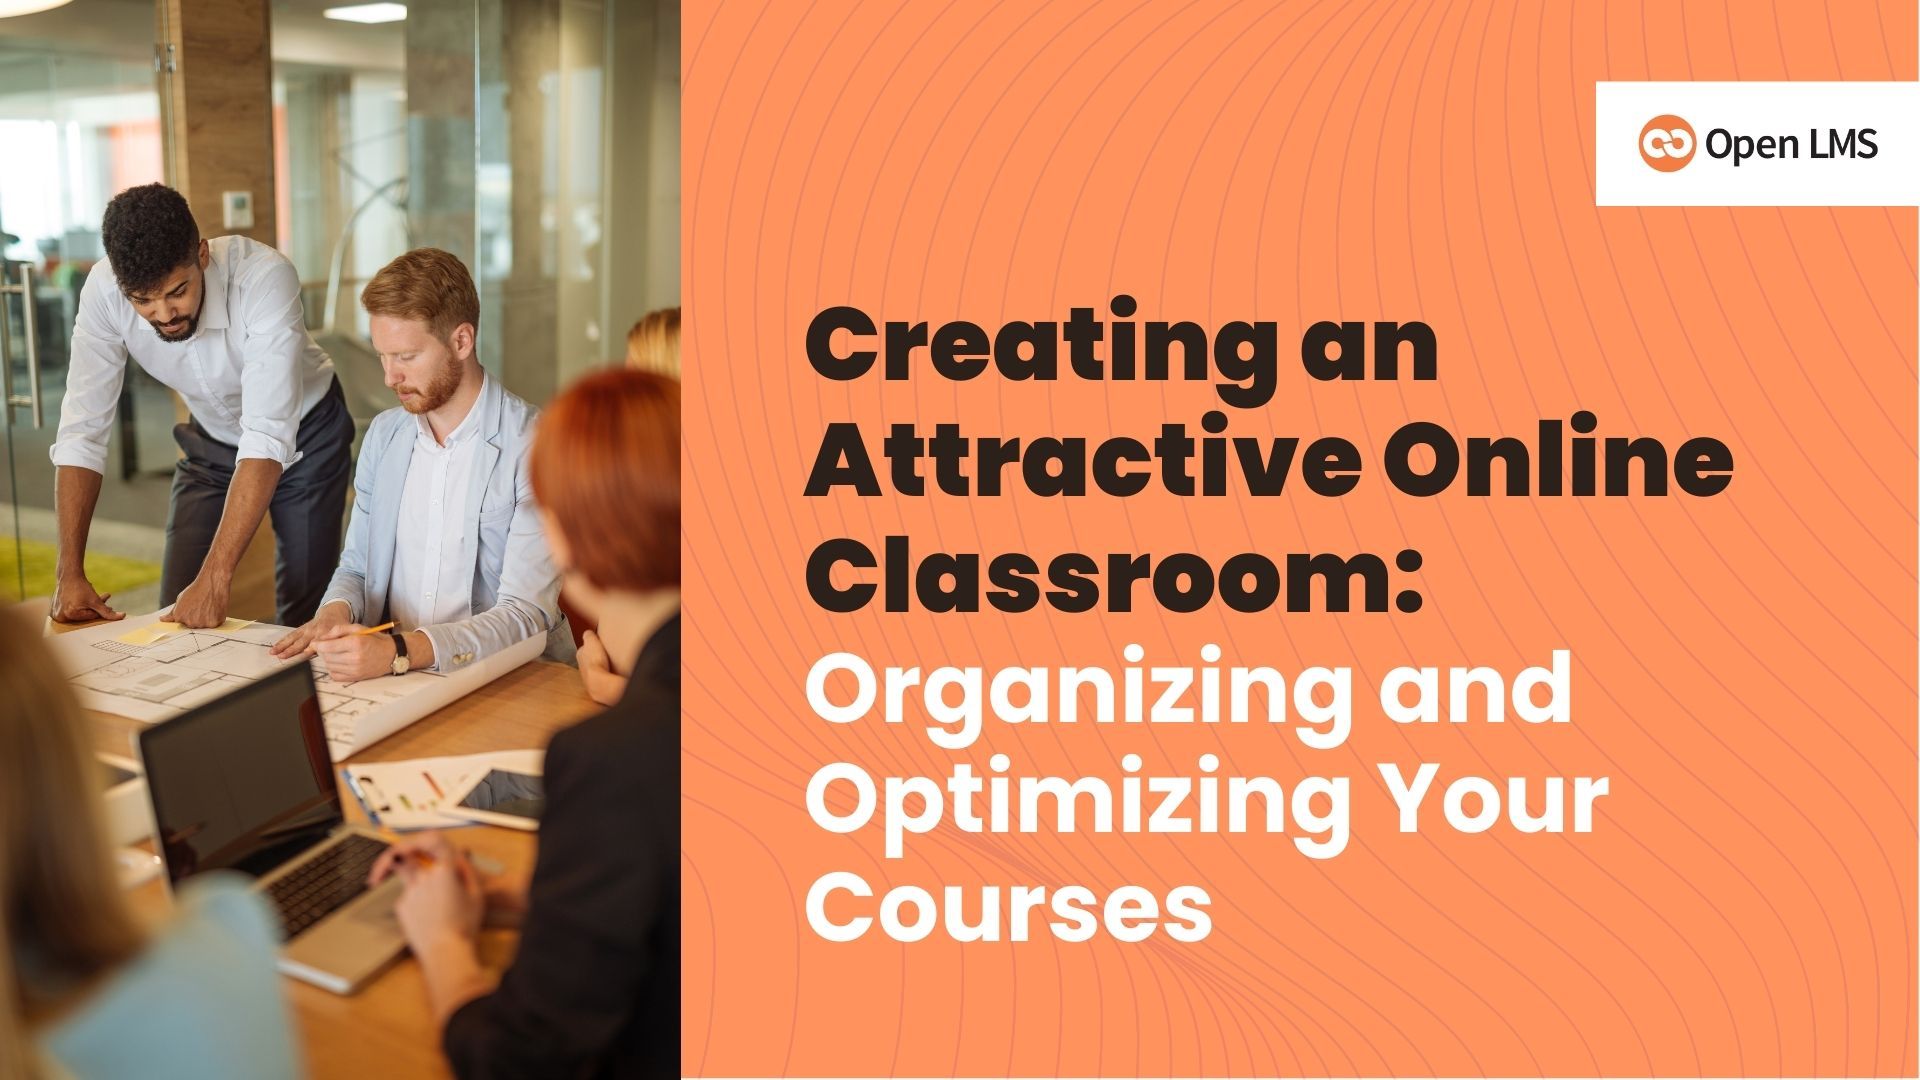 Creating an Attractive Online Classroom: Organizing and Optimizing Your Courses